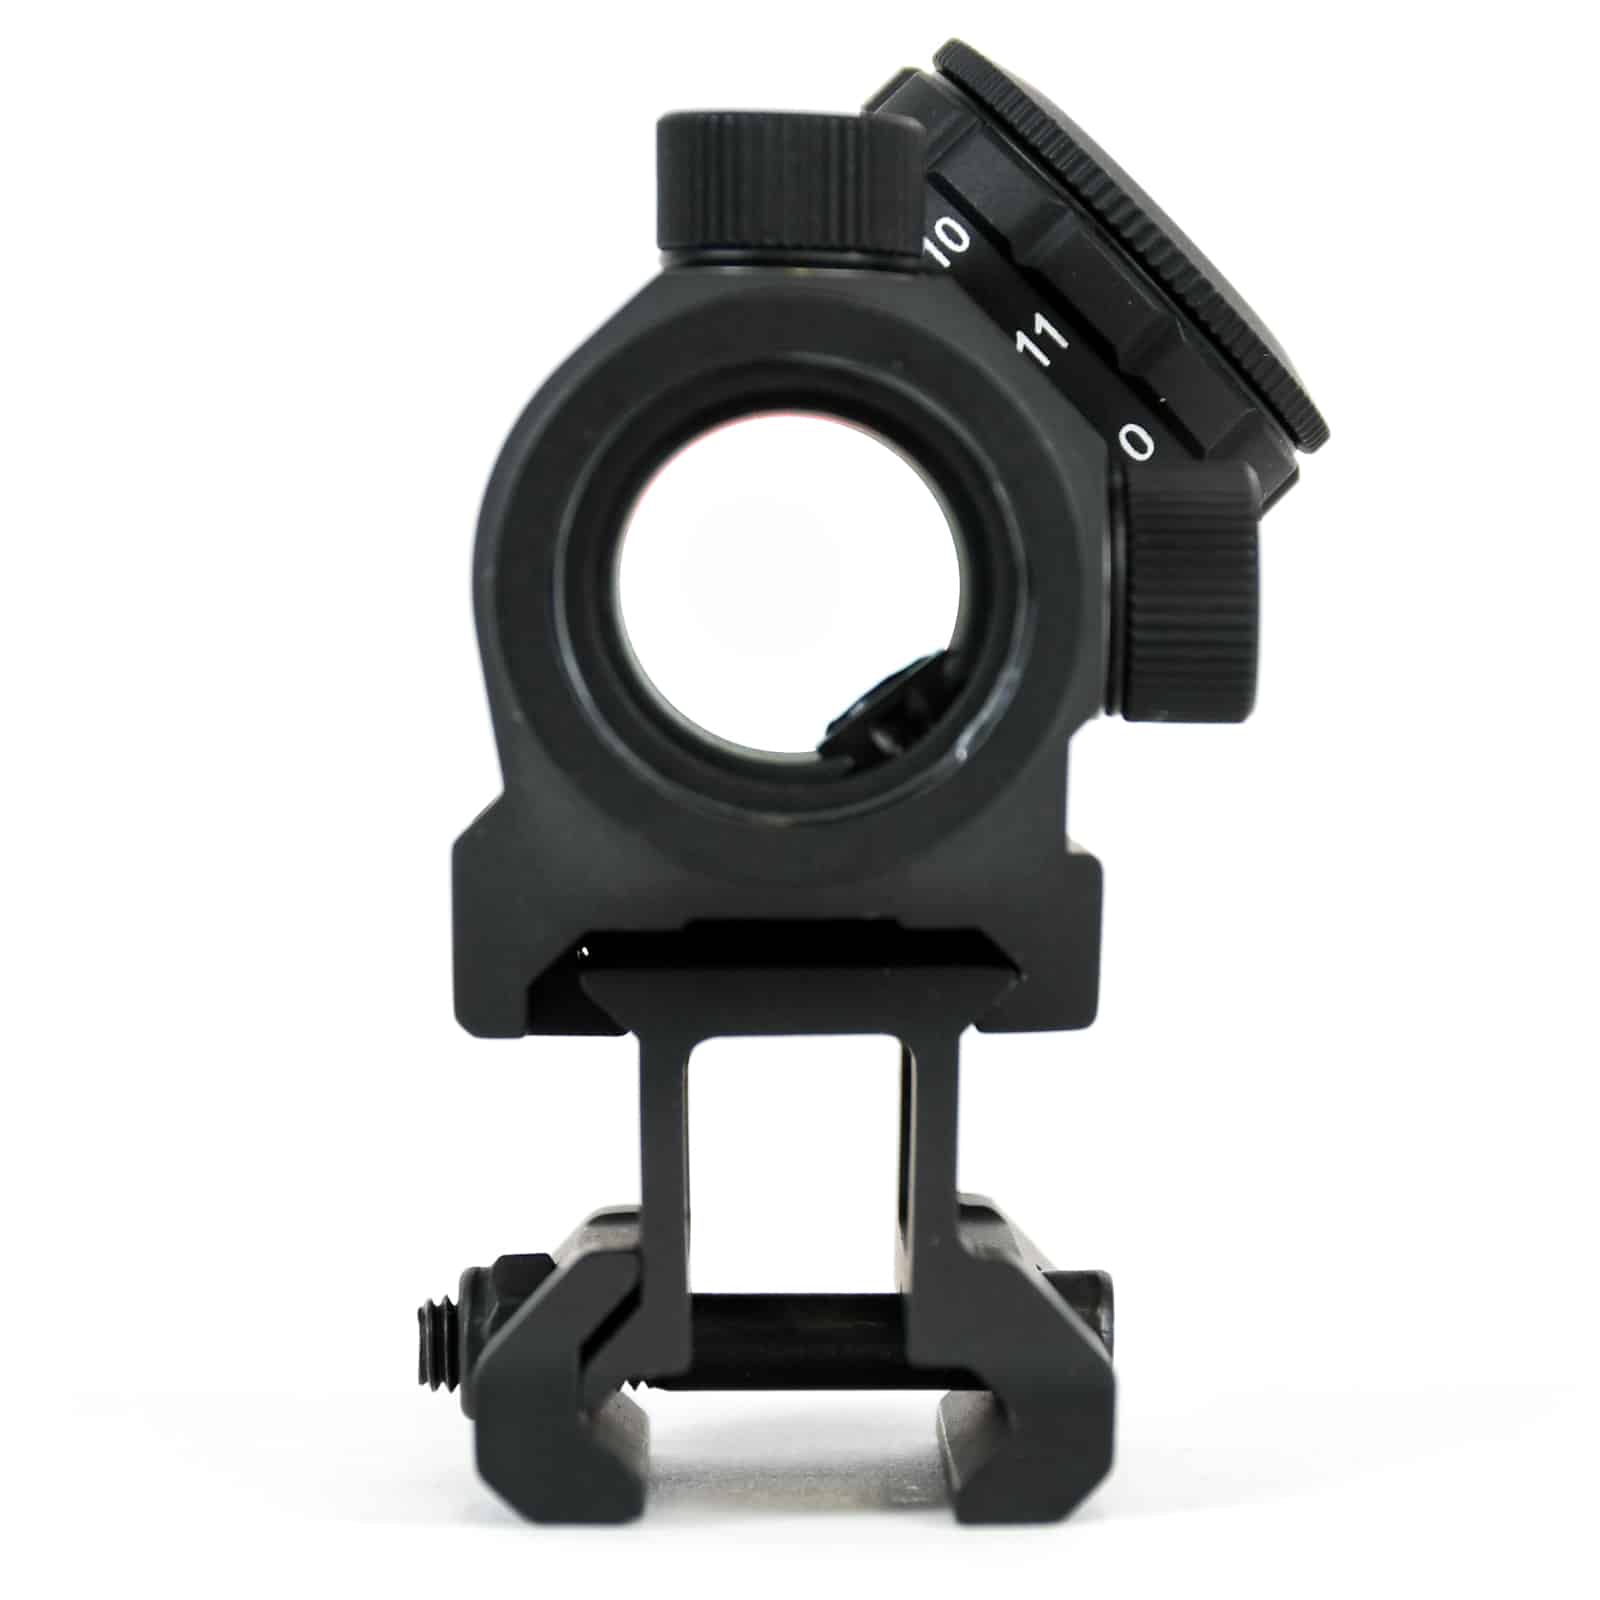 AT3 Tactical RD-50 PRO Red Dot Reflex Sight with Picatinny Riser Mount 